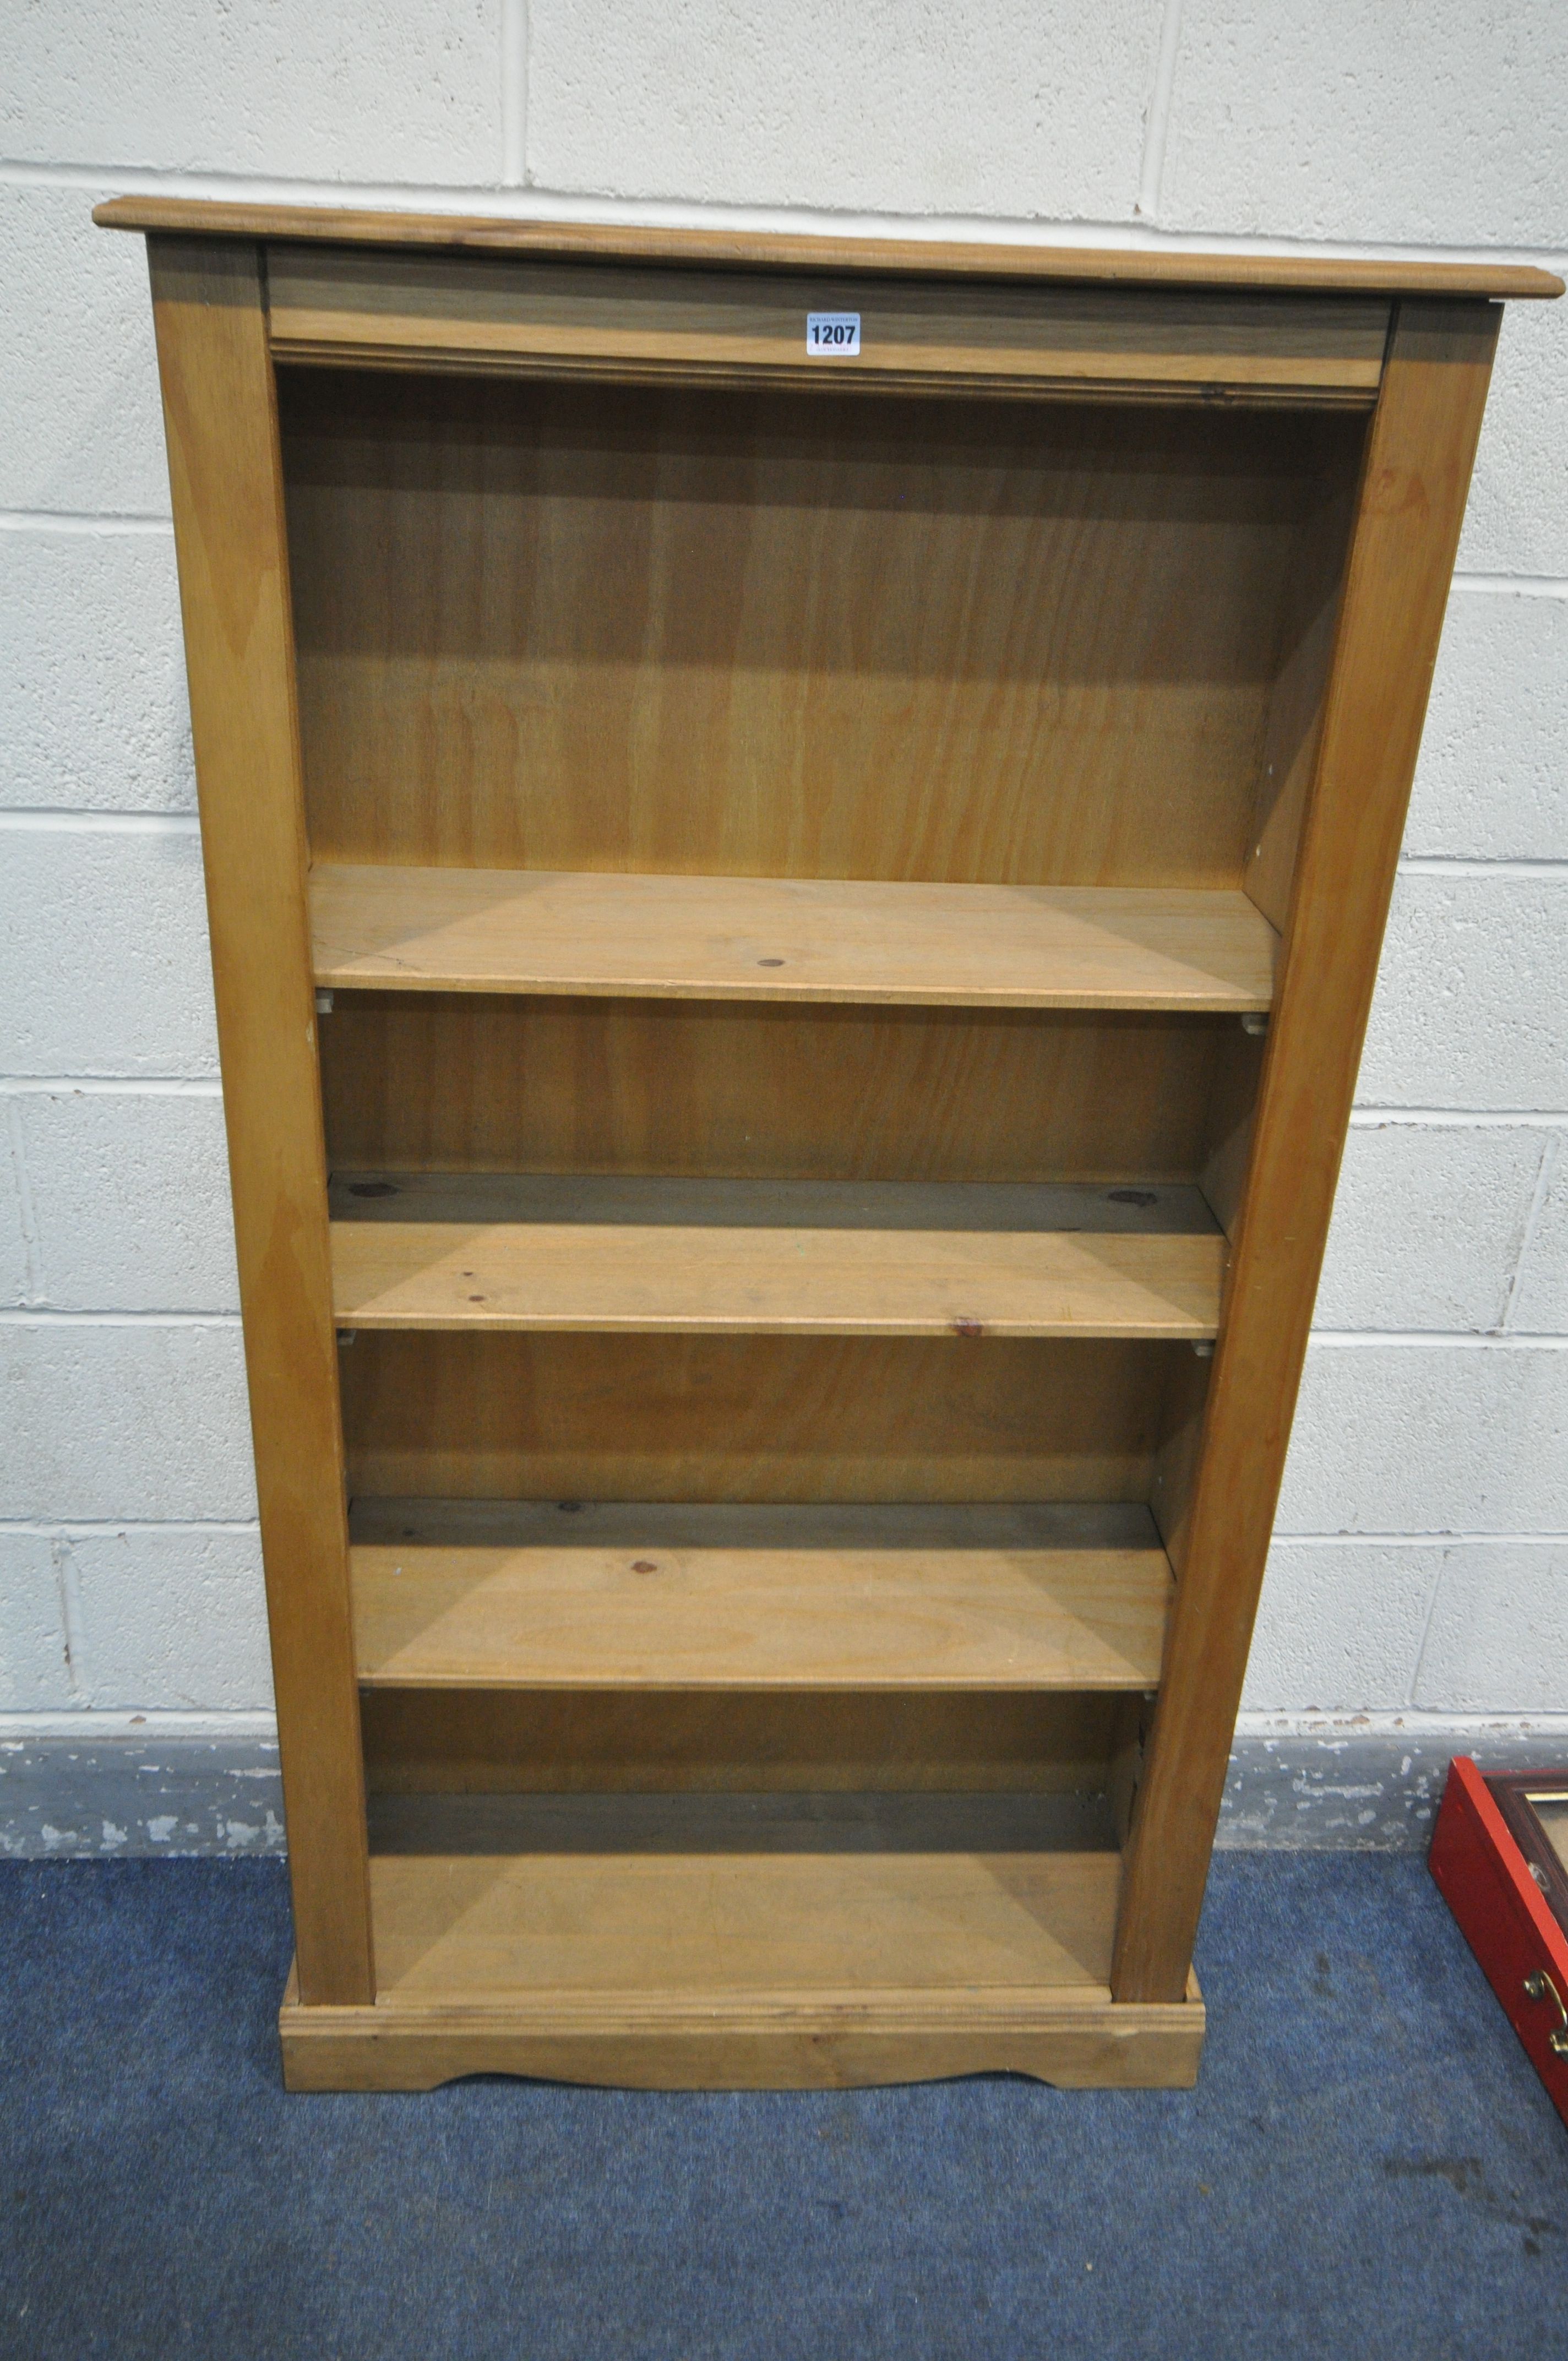 A MODERN PINE OPEN BOOKCASE, with three shelves (condition - damage to top, other imperfections)